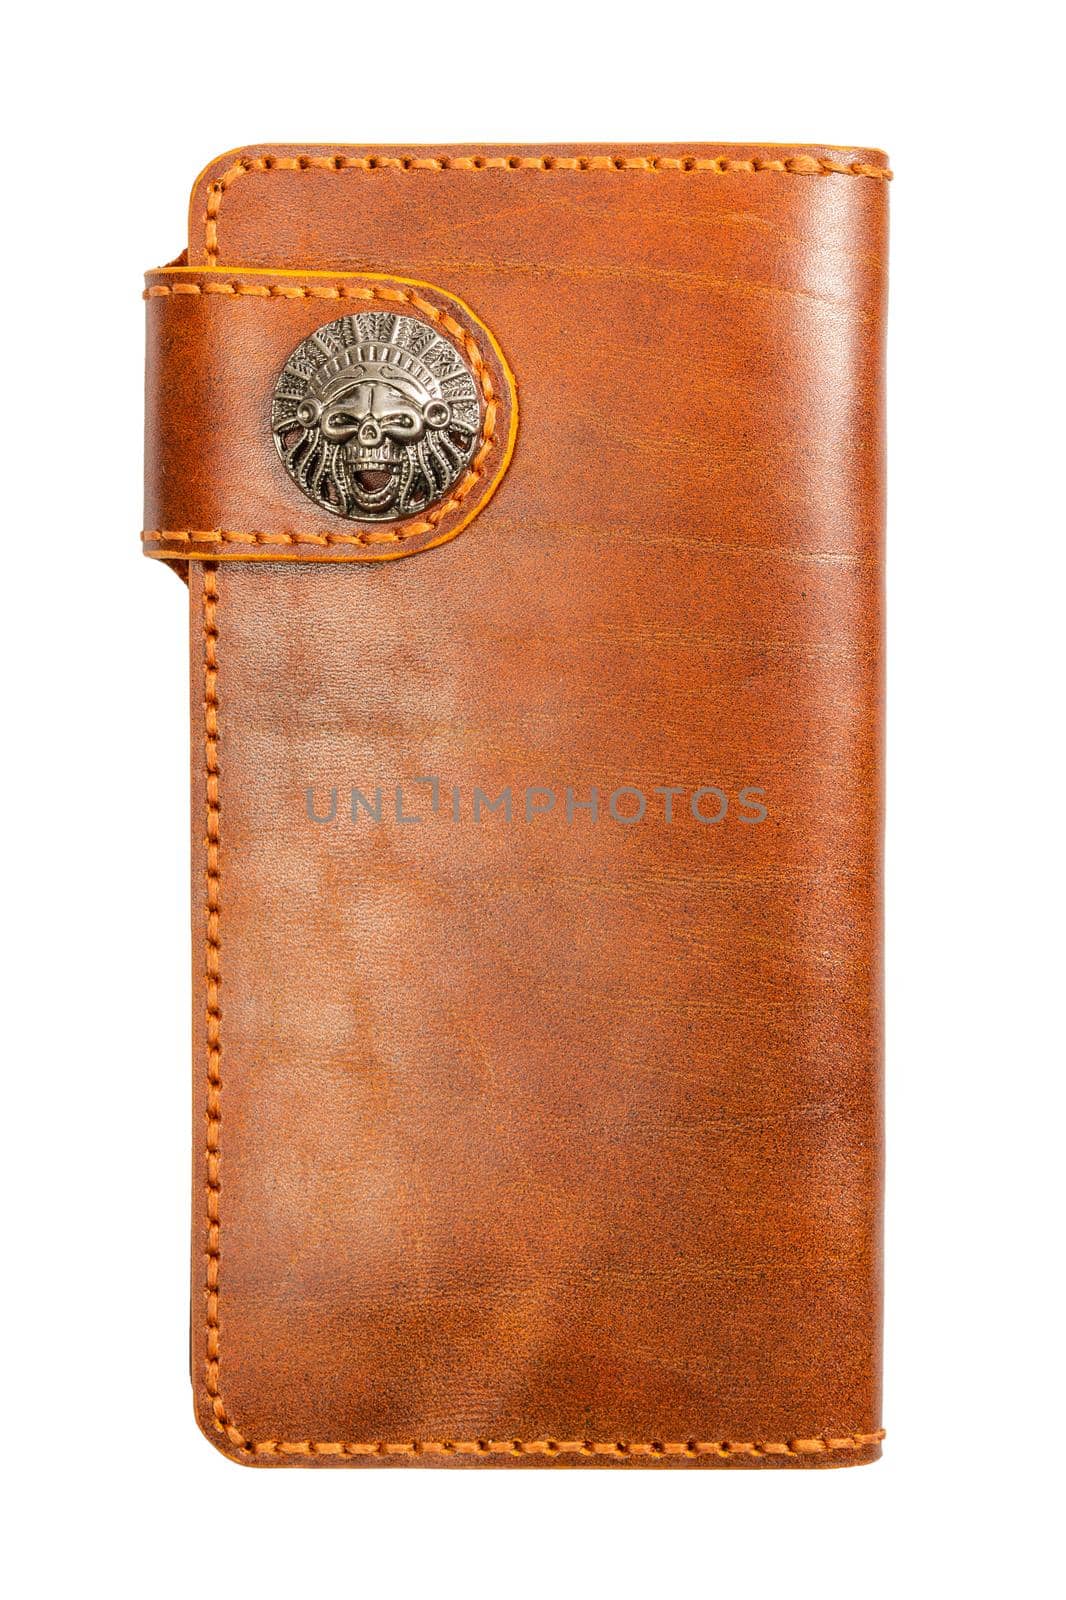 Brown natural leather women wallet isolated on white background.